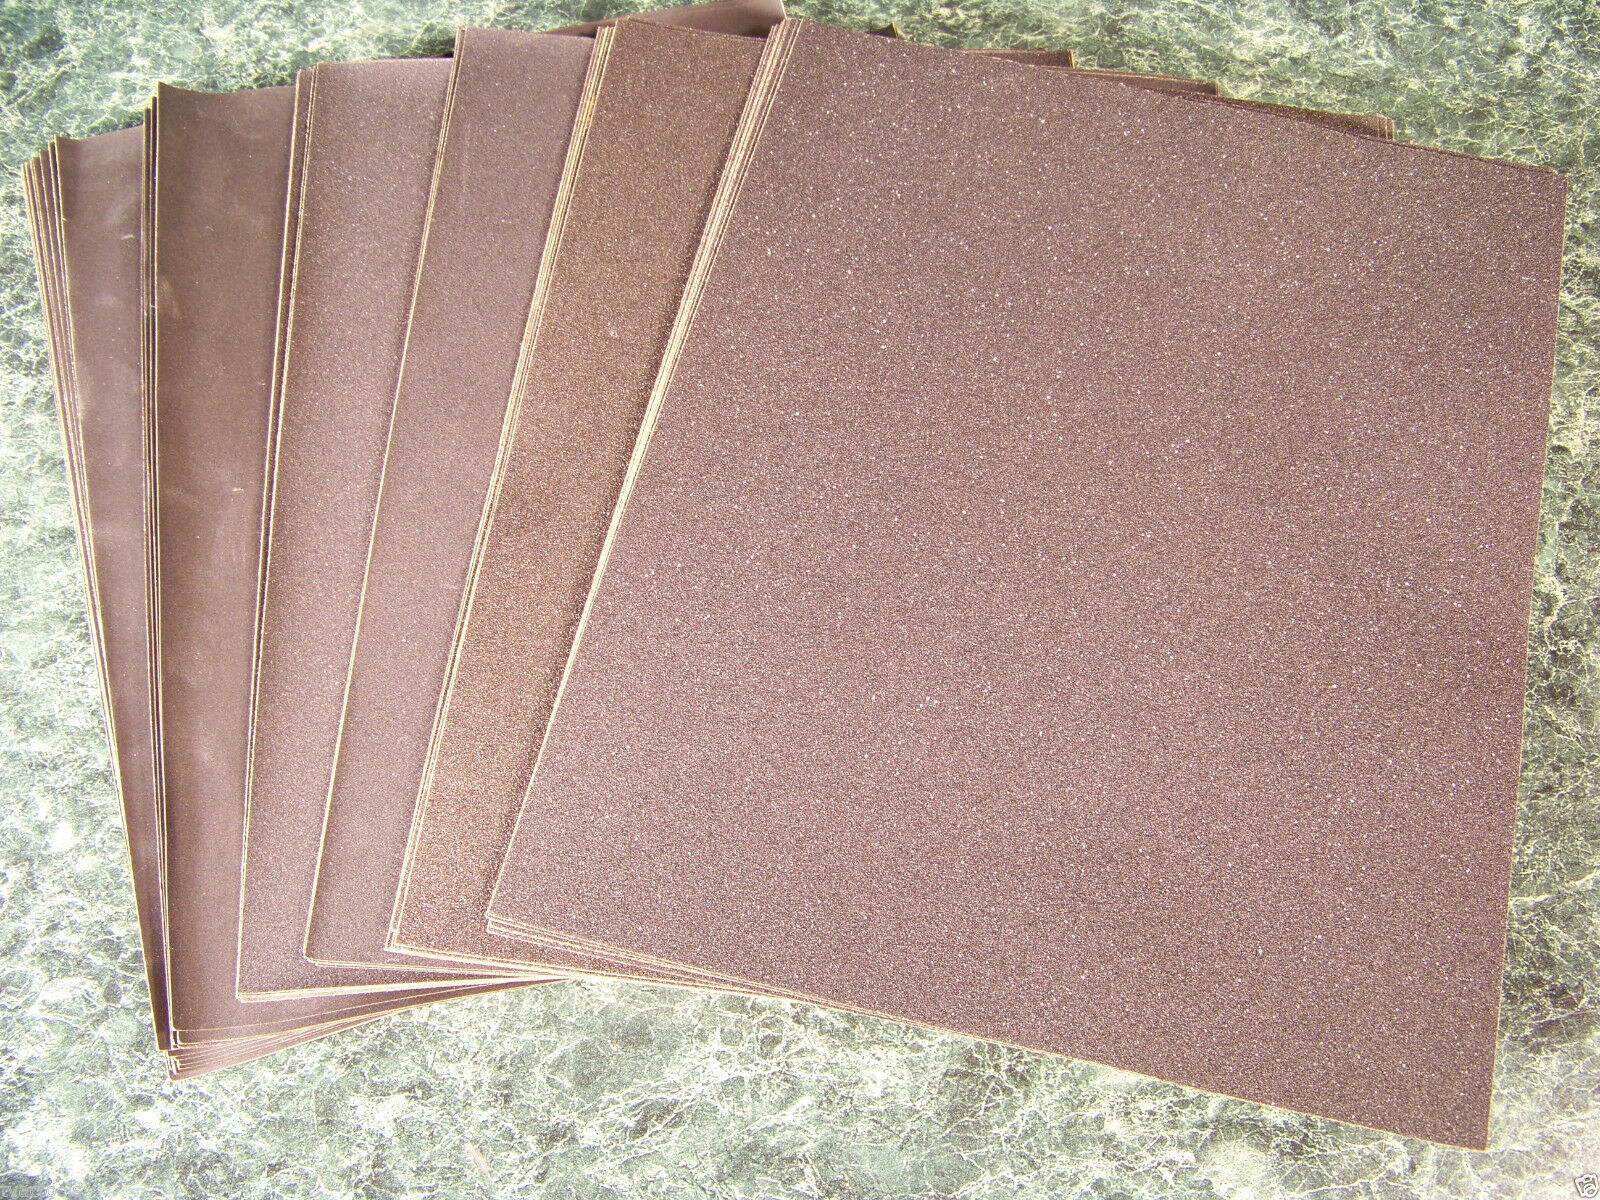 60pc SILICON CARBIDE Wet / Dry SANDPAPER SHEETS 9 x 11 Very Fine Coarse Assorted - $25.00